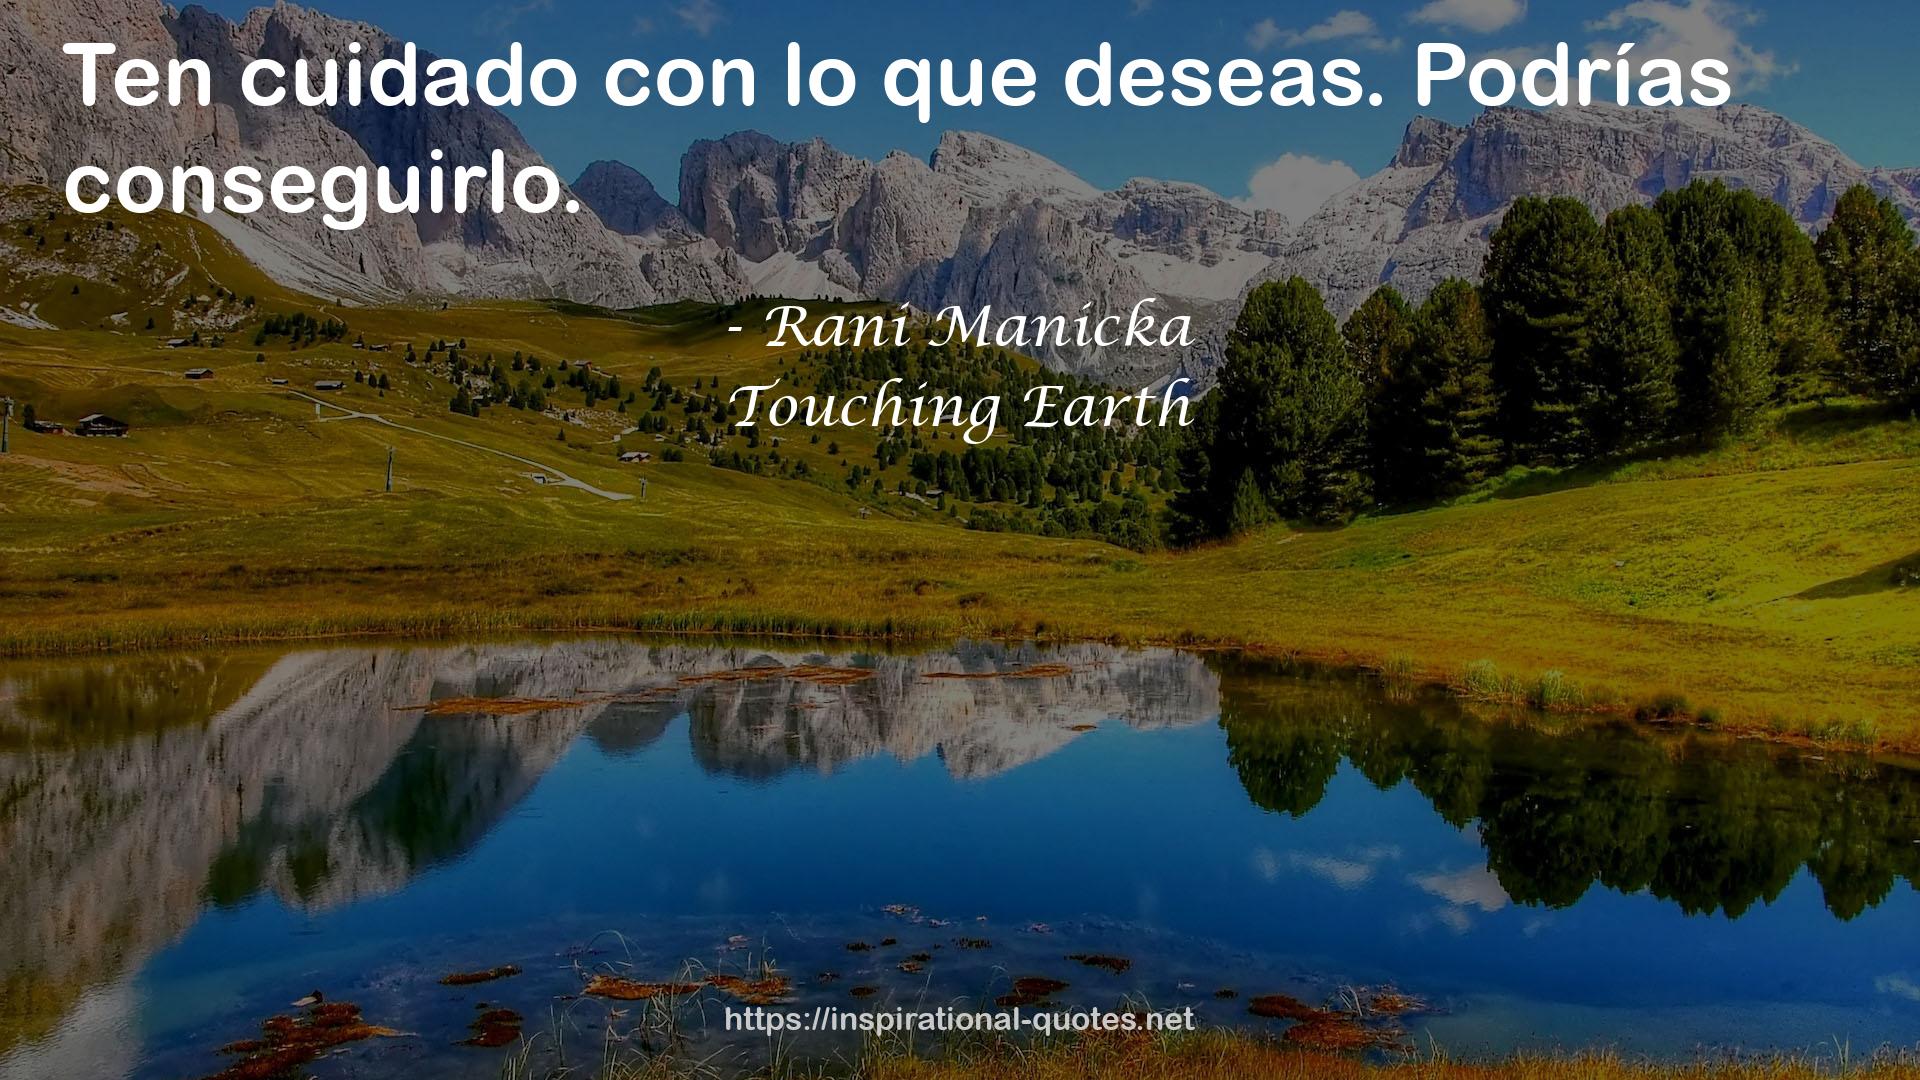 Touching Earth QUOTES